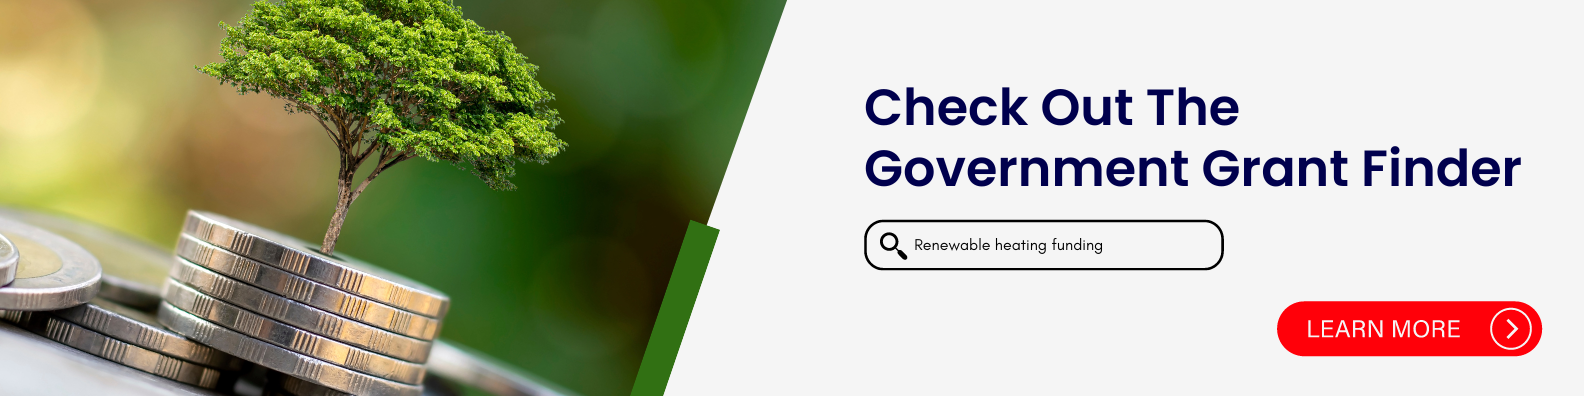 Government Grant Finder